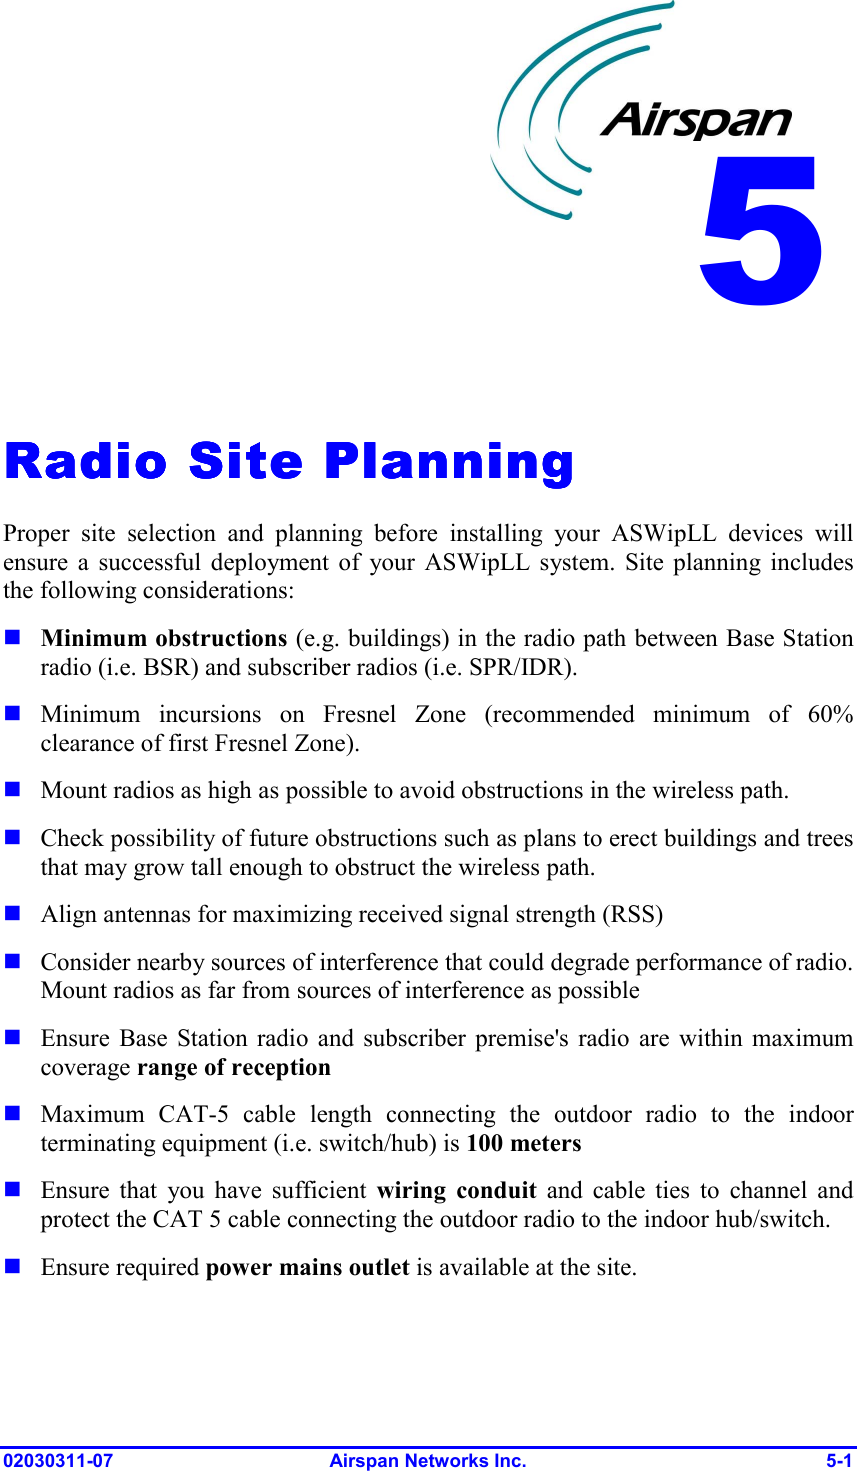  02030311-07 Airspan Networks Inc.  5-1   Radio Site PlanningRadio Site PlanningRadio Site PlanningRadio Site Planning    Proper site selection and planning before installing your ASWipLL devices will ensure a successful deployment of your ASWipLL system. Site planning includes the following considerations: ! Minimum obstructions (e.g. buildings) in the radio path between Base Station radio (i.e. BSR) and subscriber radios (i.e. SPR/IDR). ! Minimum incursions on Fresnel Zone (recommended minimum of 60% clearance of first Fresnel Zone). ! Mount radios as high as possible to avoid obstructions in the wireless path.  ! Check possibility of future obstructions such as plans to erect buildings and trees that may grow tall enough to obstruct the wireless path. ! Align antennas for maximizing received signal strength (RSS)  ! Consider nearby sources of interference that could degrade performance of radio. Mount radios as far from sources of interference as possible ! Ensure Base Station radio and subscriber premise&apos;s radio are within maximum coverage range of reception ! Maximum CAT-5 cable length connecting the outdoor radio to the indoor terminating equipment (i.e. switch/hub) is 100 meters ! Ensure that you have sufficient wiring conduit and cable ties to channel and protect the CAT 5 cable connecting the outdoor radio to the indoor hub/switch. ! Ensure required power mains outlet is available at the site. 5 